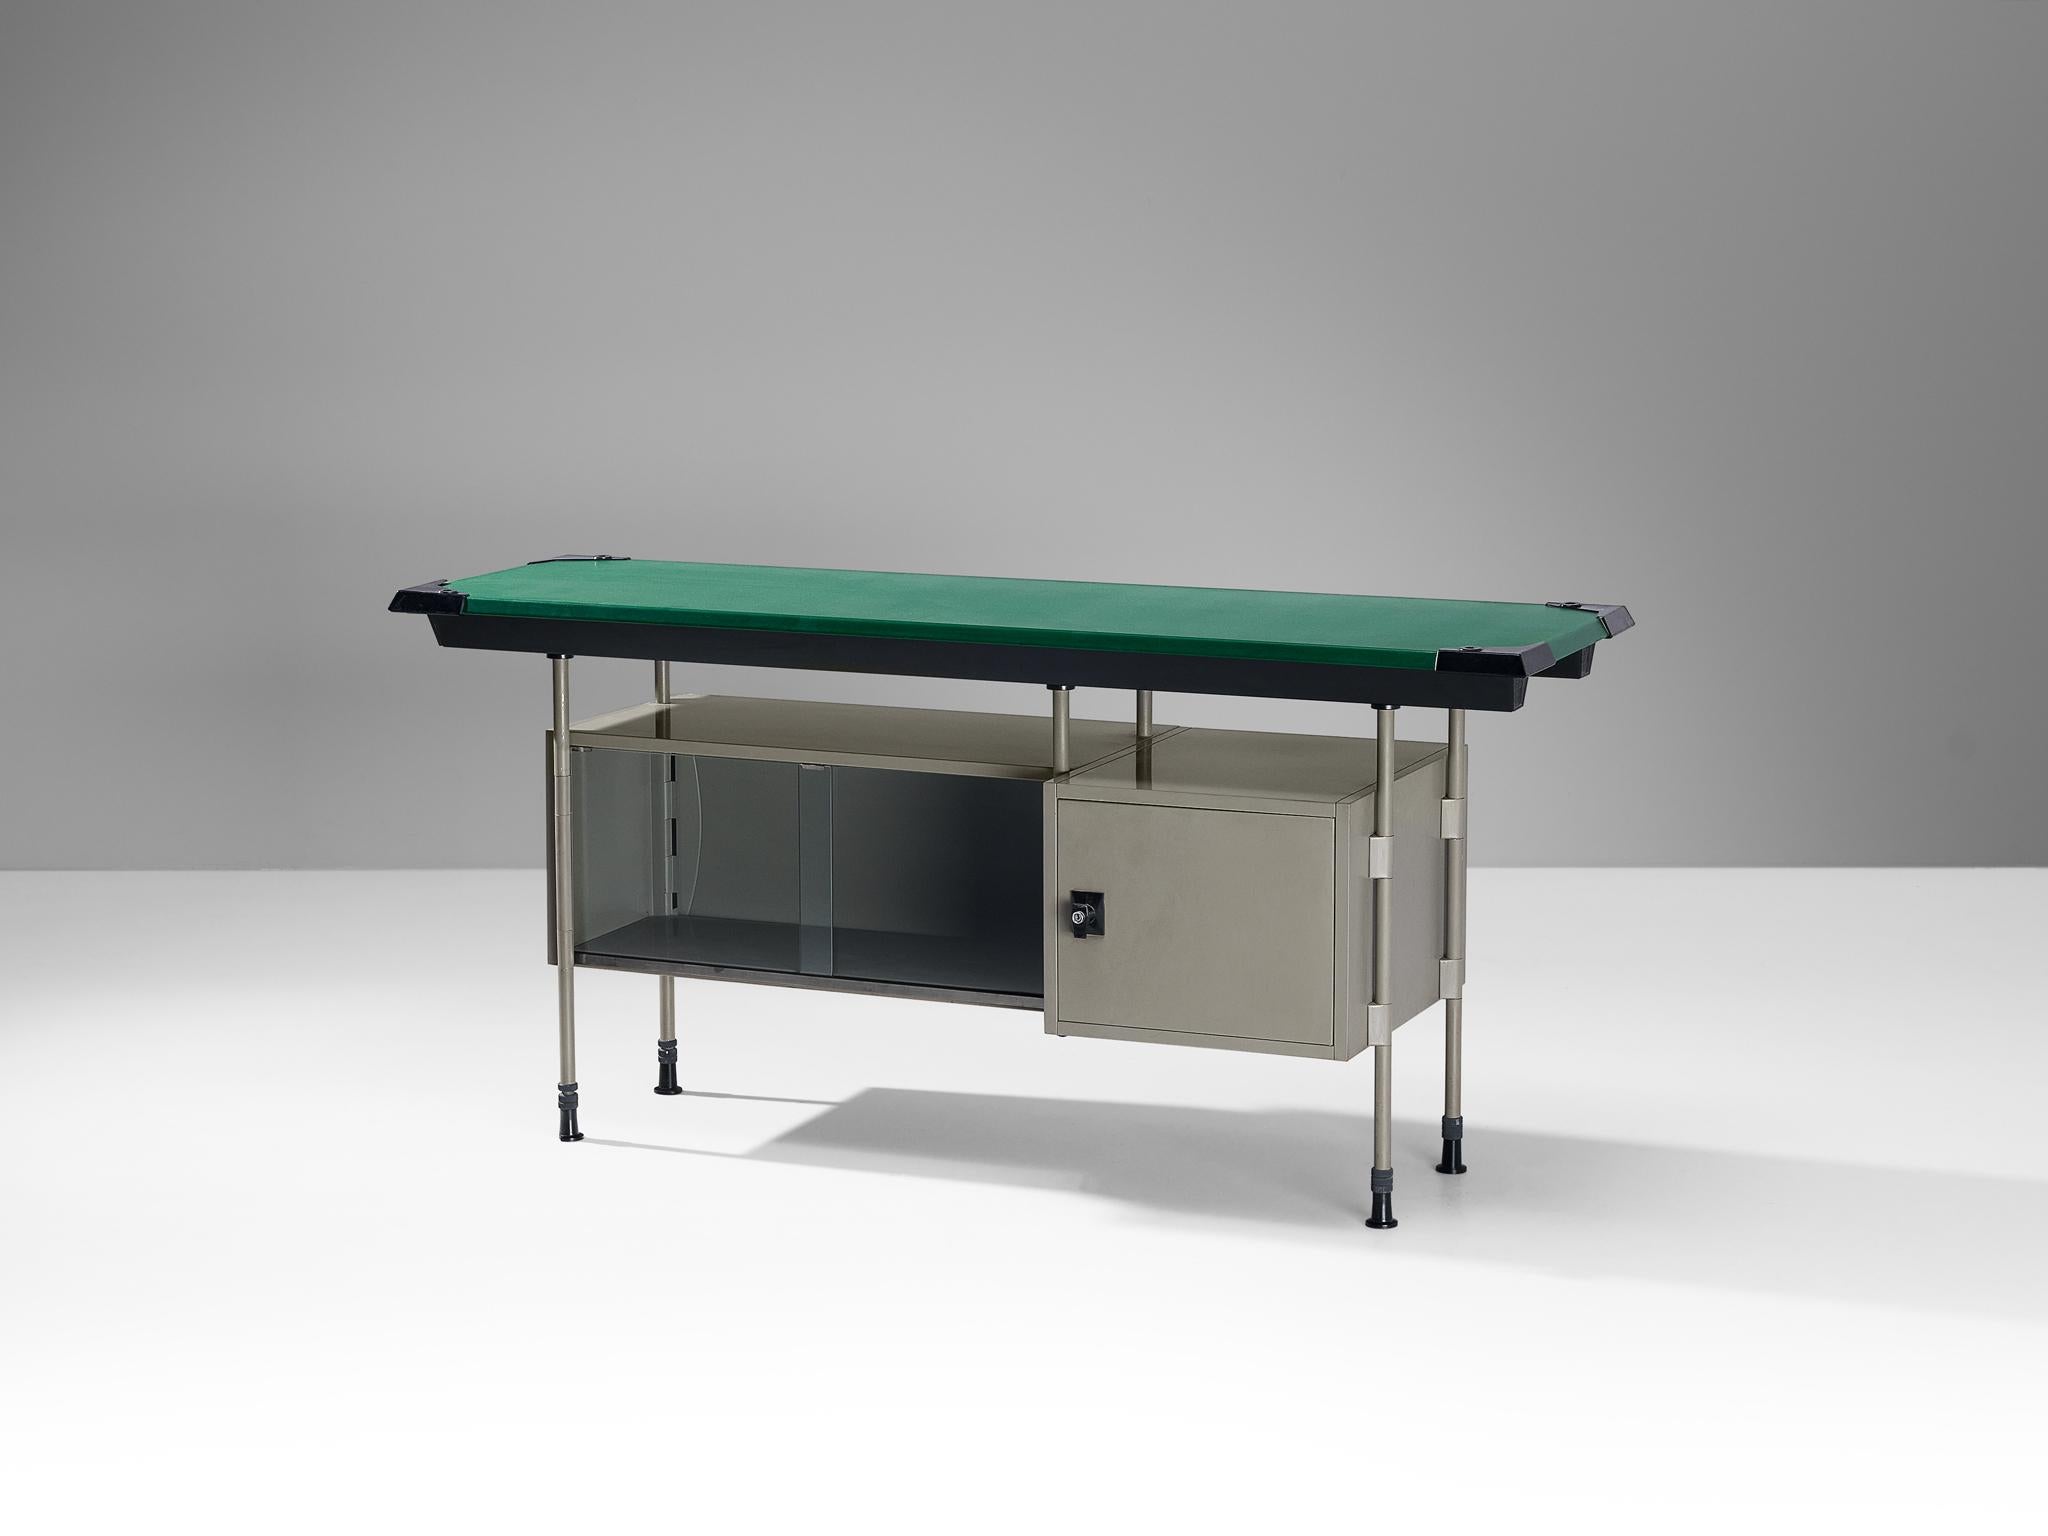 Studio BBPR for Olivetti, 'Spazio' sideboard, coated steel, plastic, glass, vinyl, Italy, design 1959/60, production, 1960s.

In 1954, Olivetti, the Italian office equipment manufacturer, hired BBPR to design their New York showroom on Fifth Avenue